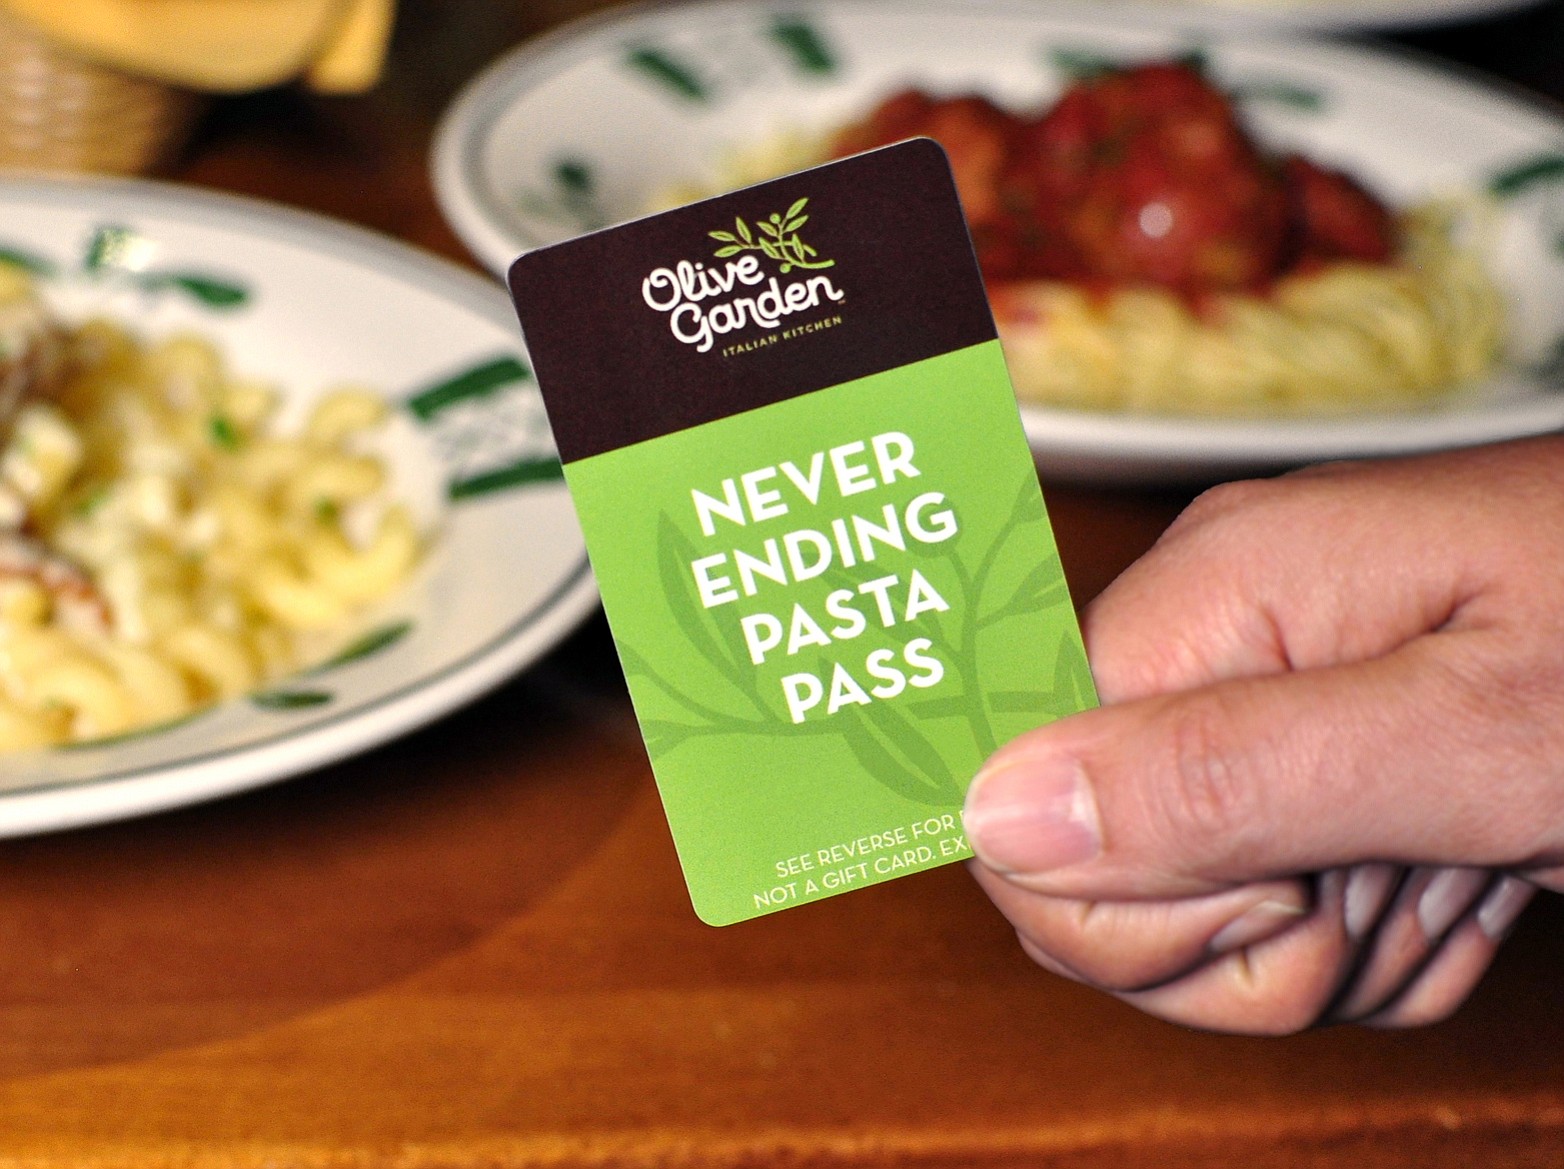 Darden Restaurants
The Italian-themed chain Olive Garden has announced to it will let 1,000 people pay $100 for the pass that gives them unprecedented free rein to its pasta. The &quot;Never Ending Pasta Pass&quot; sold out less than an hour after they went on sale online.